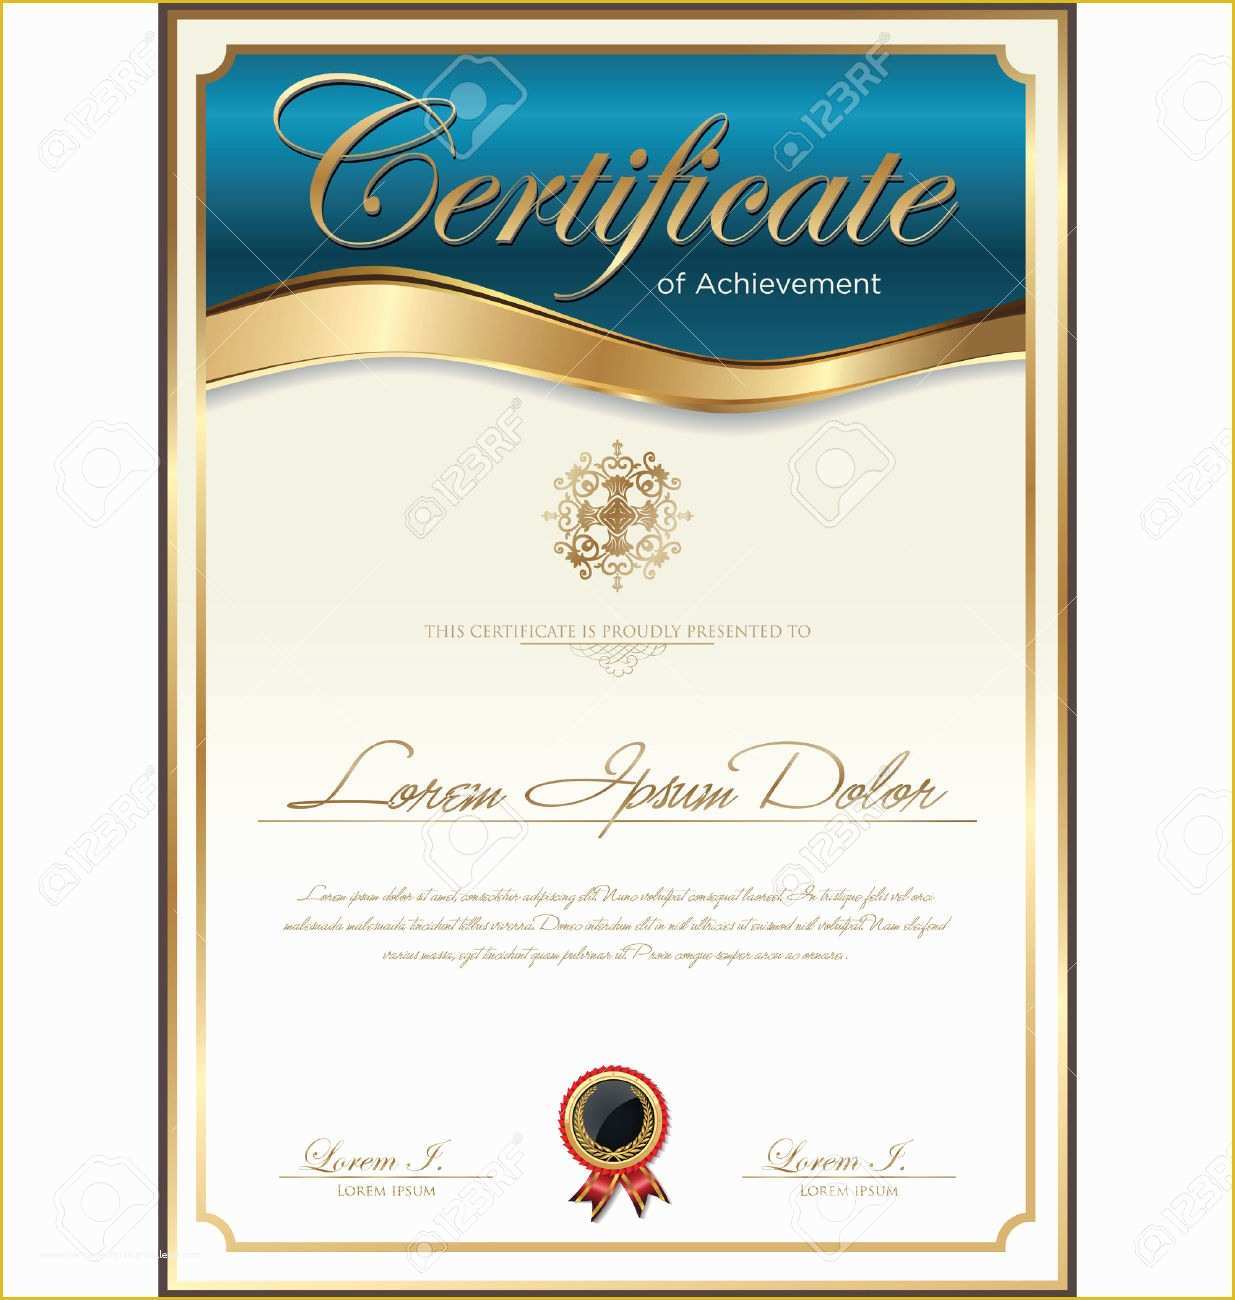 Free School Award Certificate Templates Of Certificate Templates Fotolip Rich Image and Wallpaper